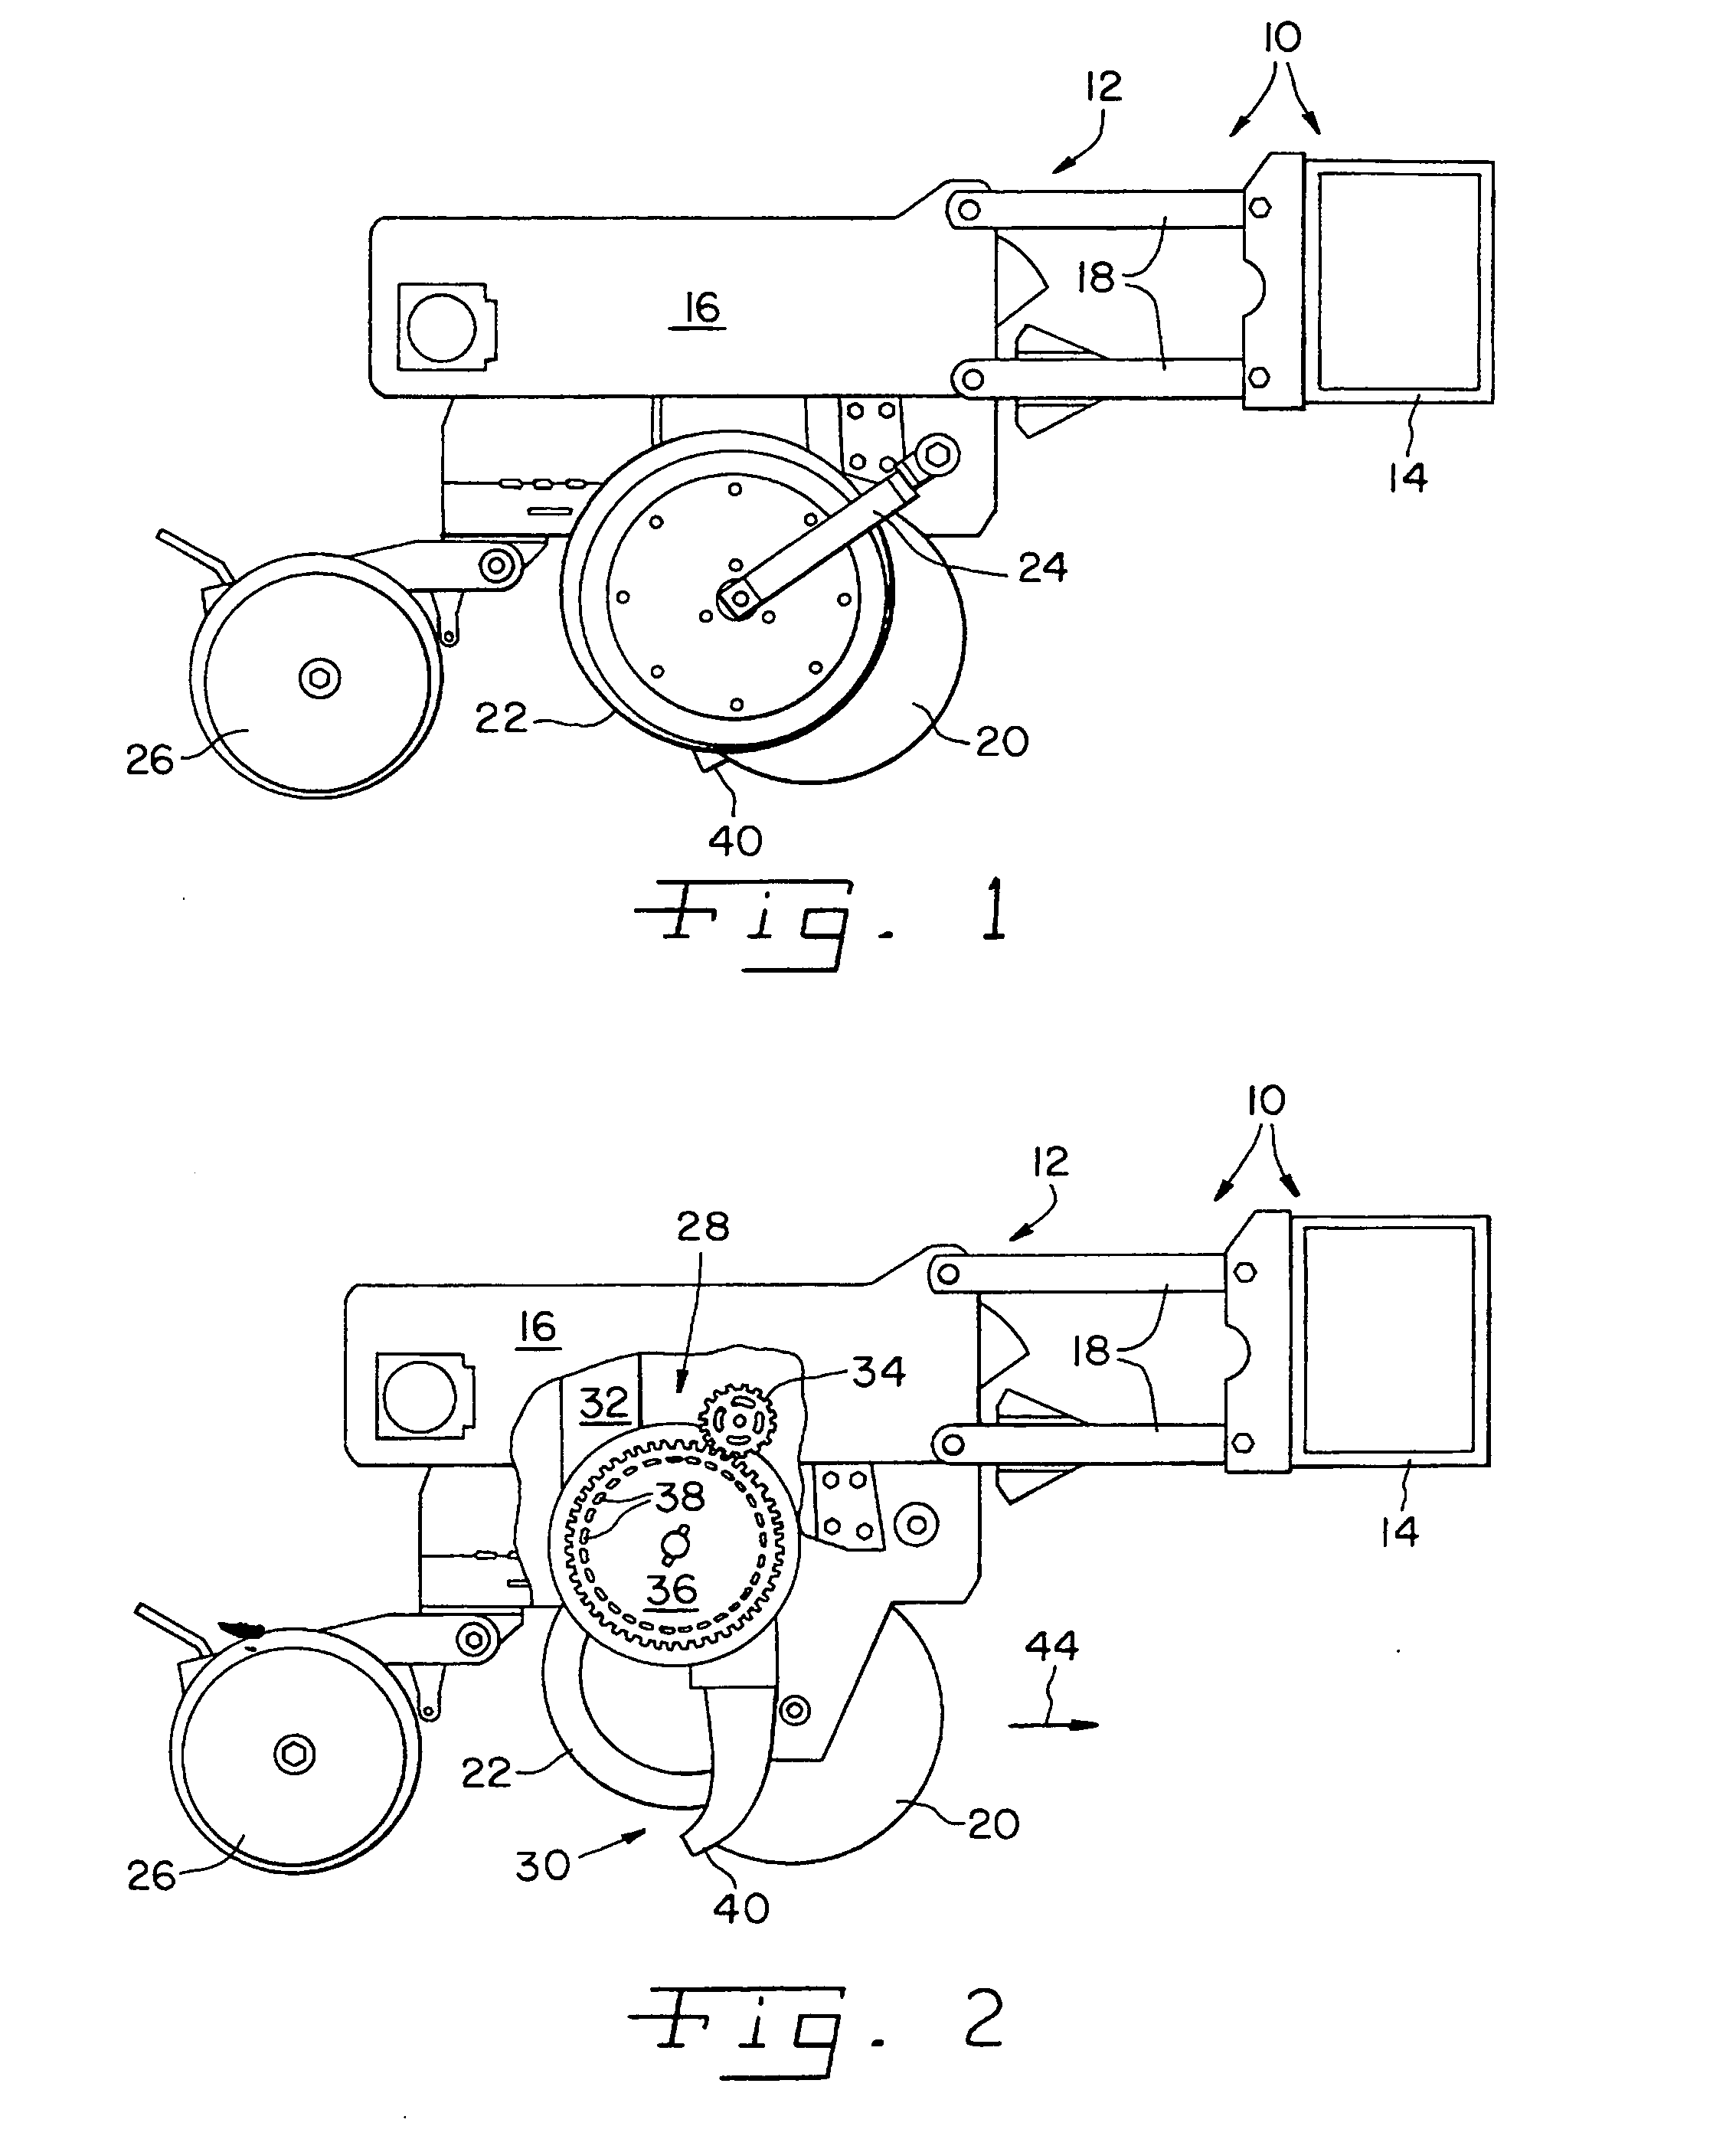 Seed singulator for a seed metering system in a seeding machine